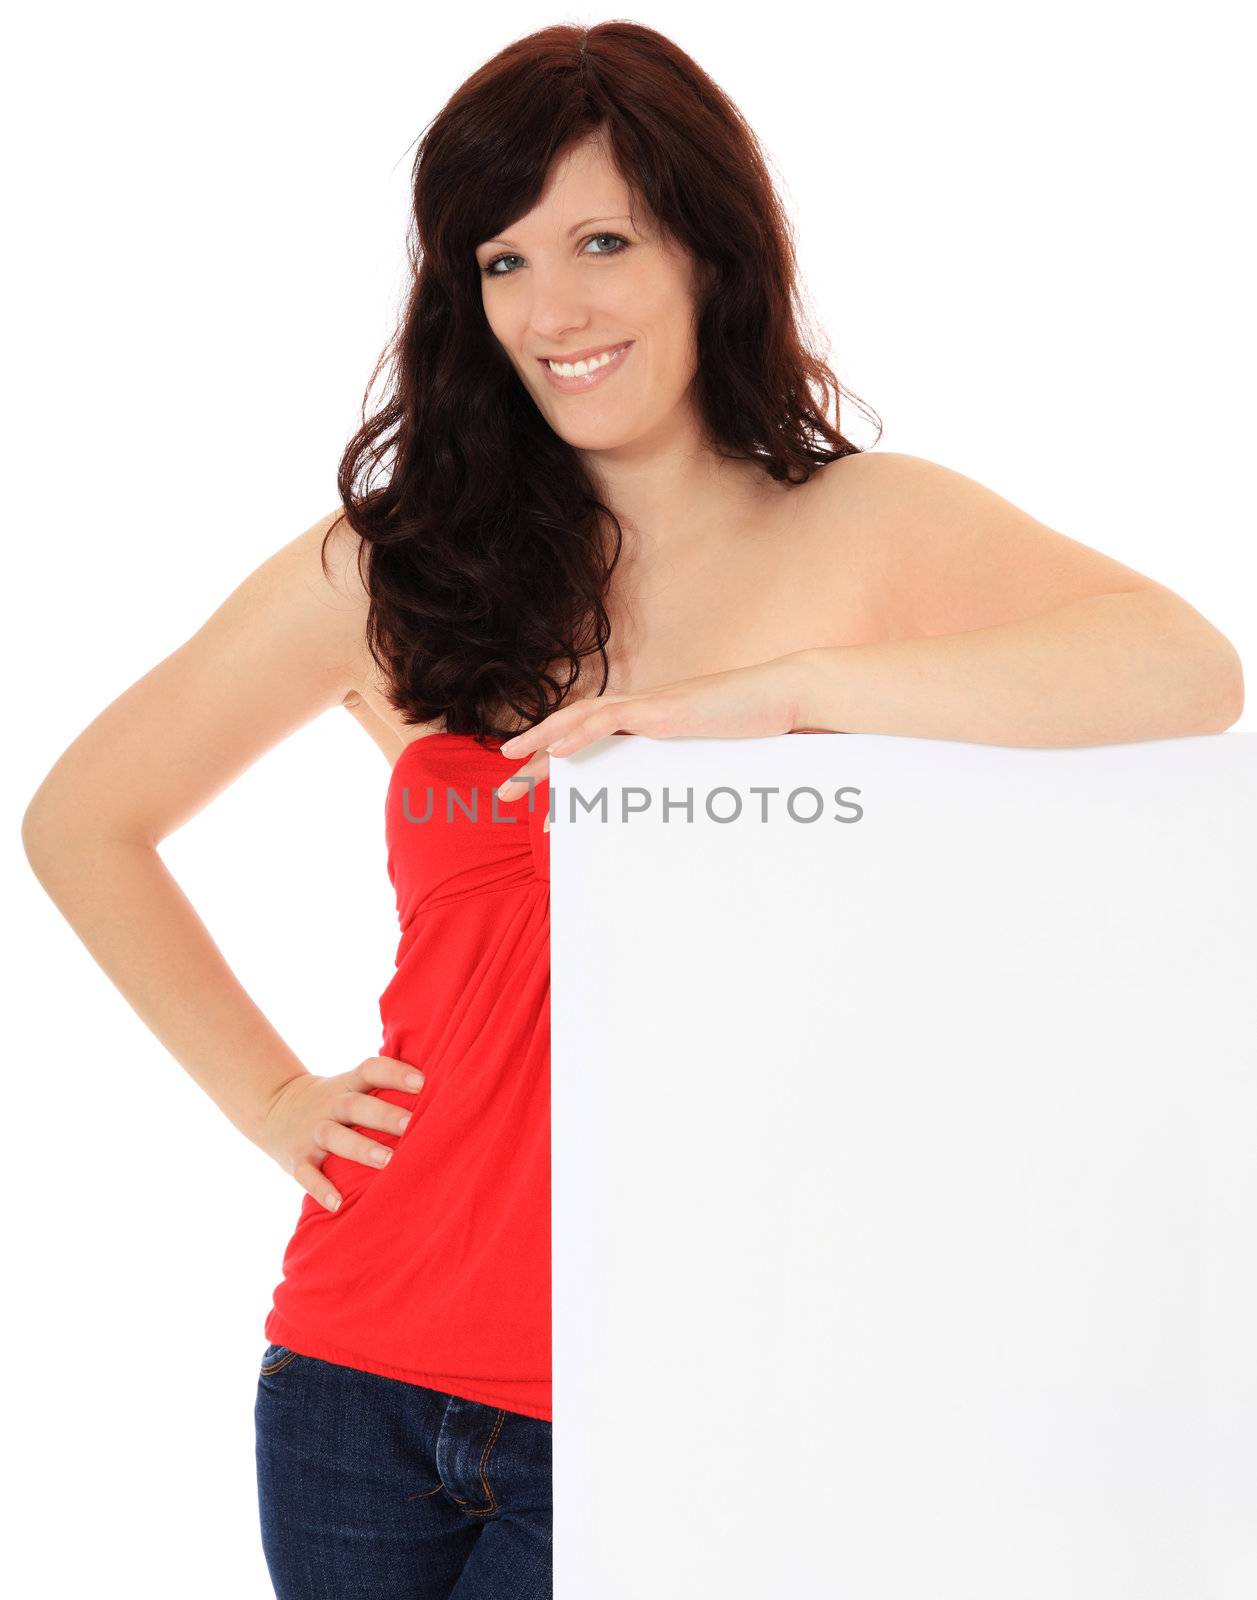 Attractive young woman standing next to blank white sign. All on white background.